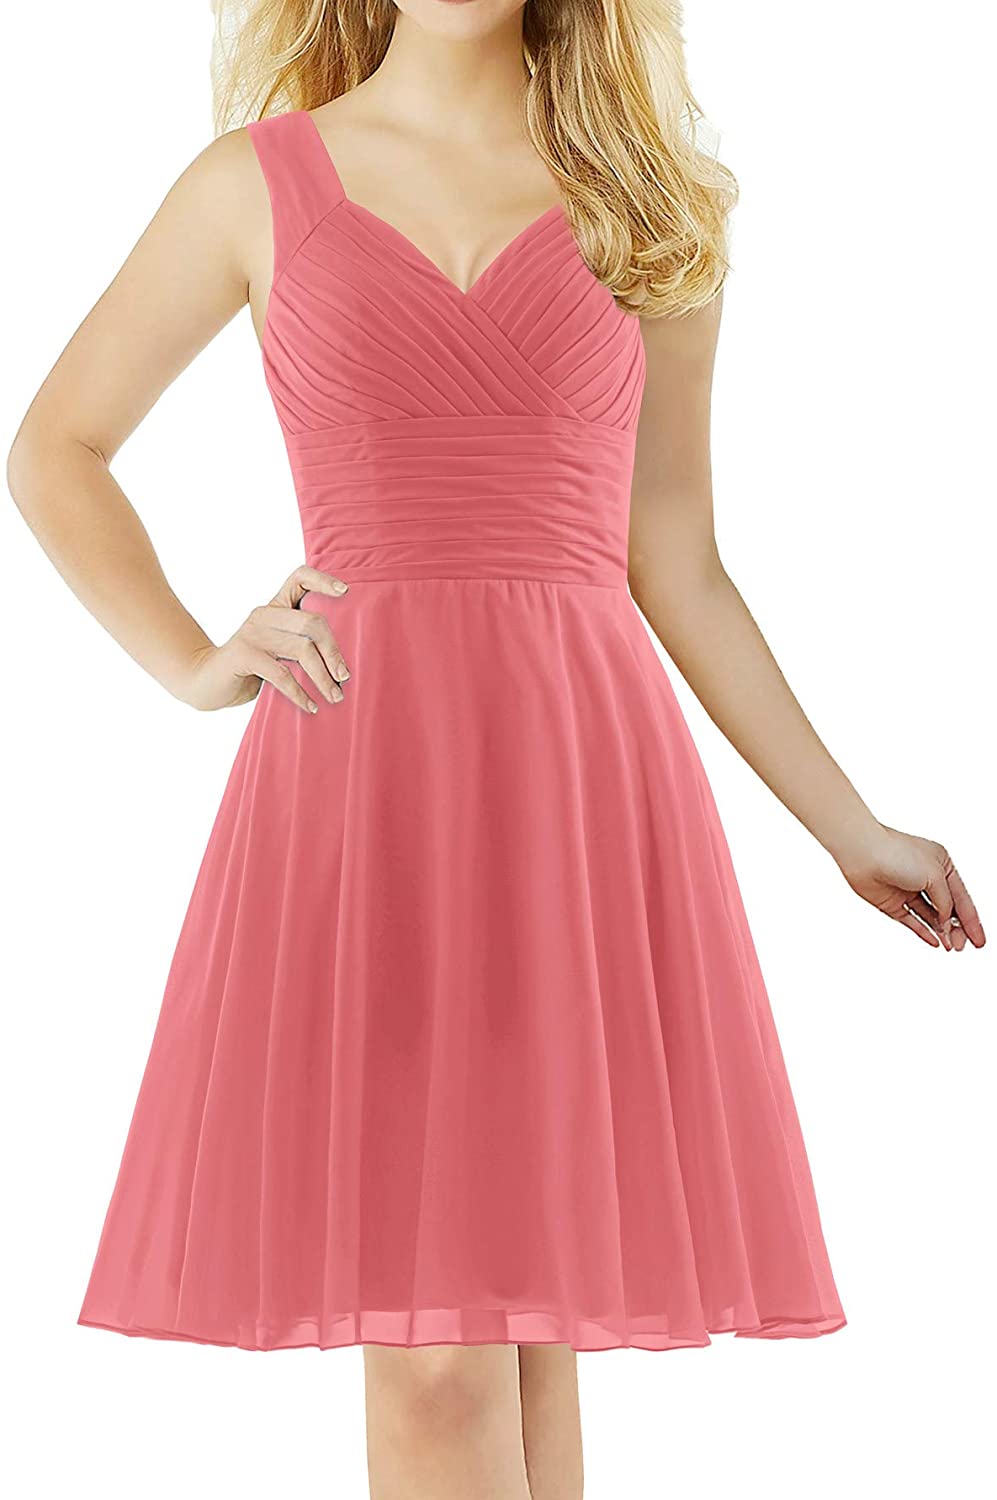 ANTS Womens Pleated Sweetheart Bridesmaid Dresses A Line Cocktail Gown 